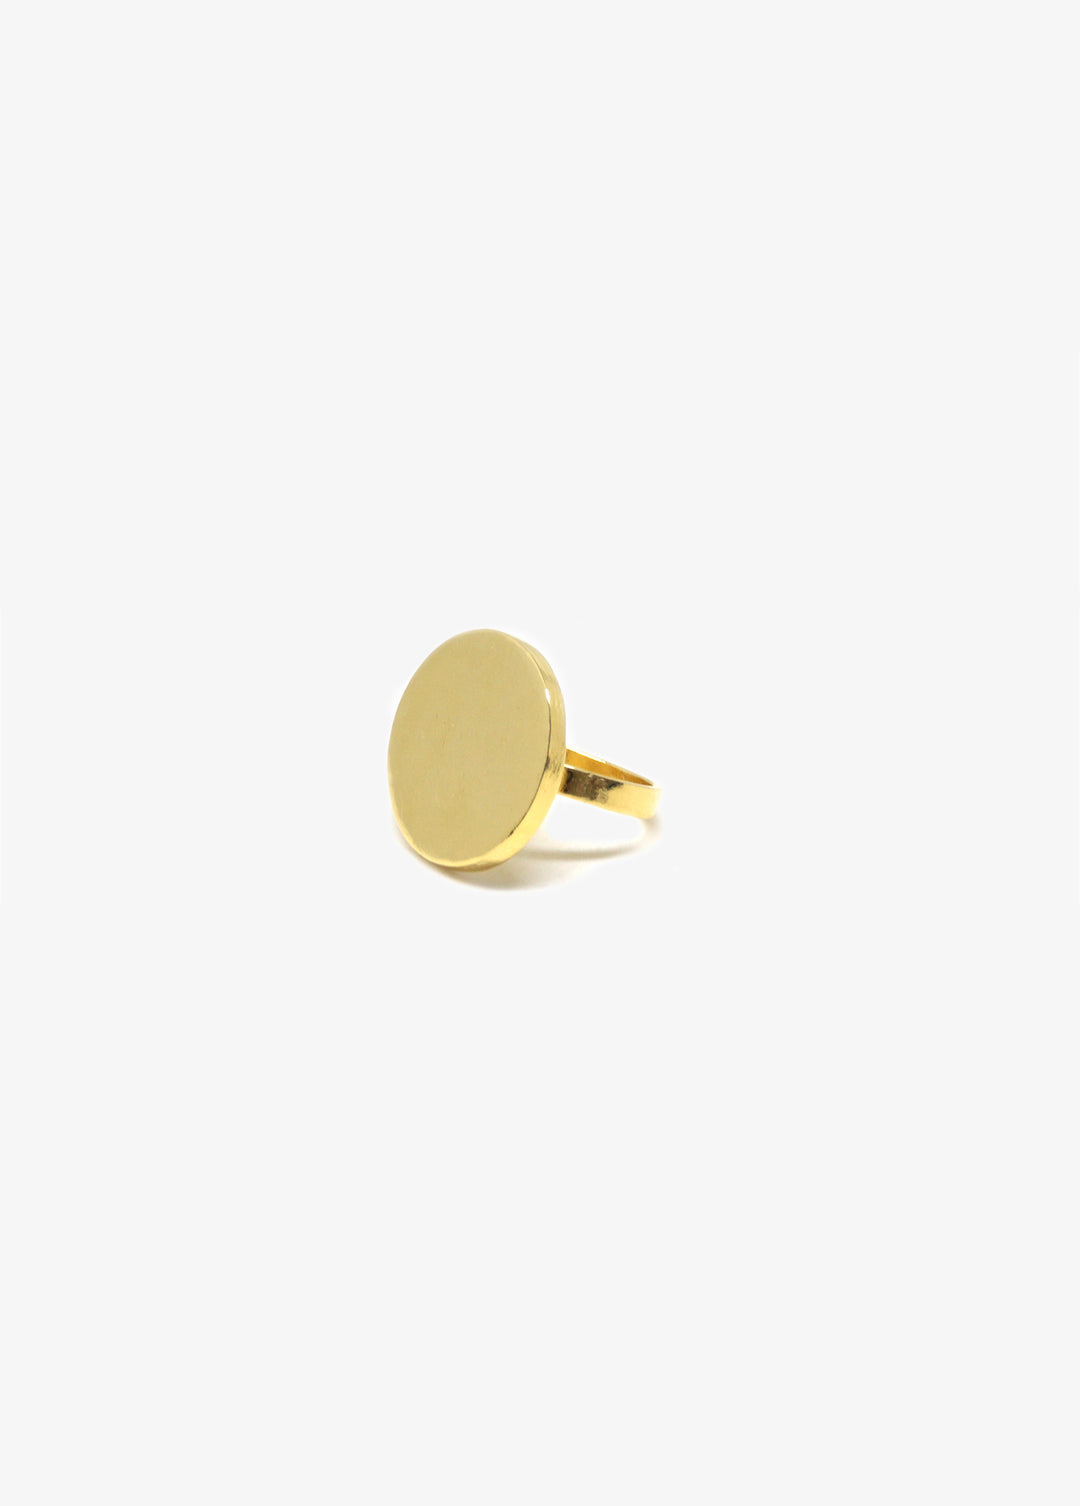 llayers-men-women-gold-rond-art-deco-ring-jewelry-solstice-handcrafted-in-Brooklyn-New-York-1